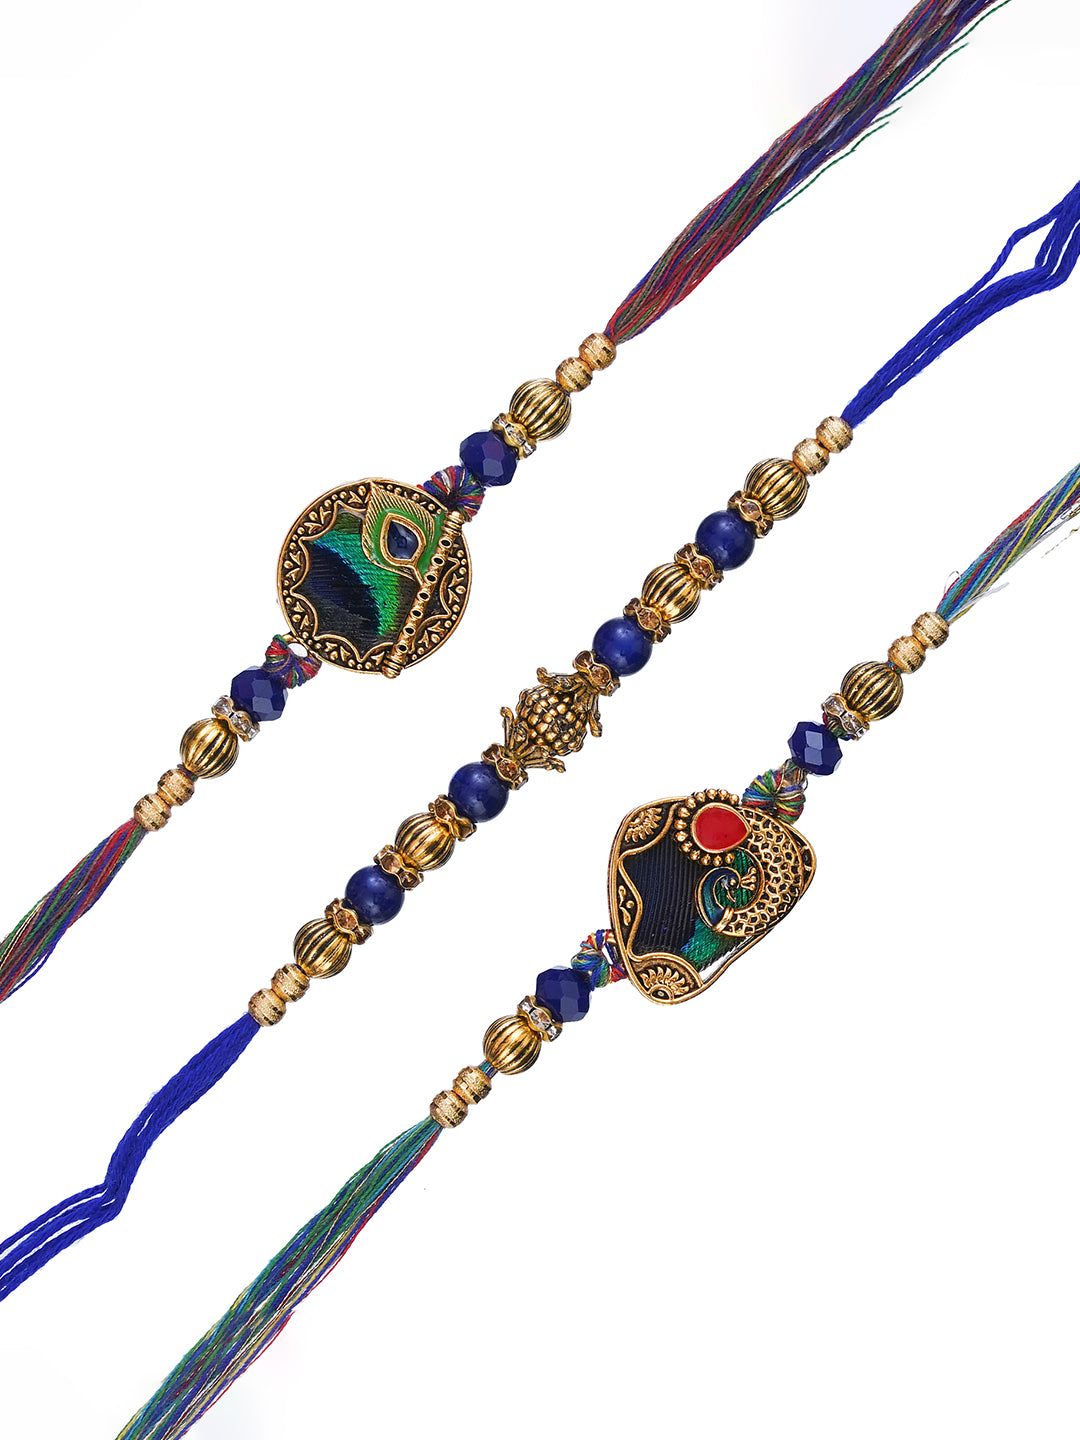 Set of 3 Peacock Feather, Flute Designer Rakhis for Brother, Bhabhi, Kids with Roli Chawal Pack 2